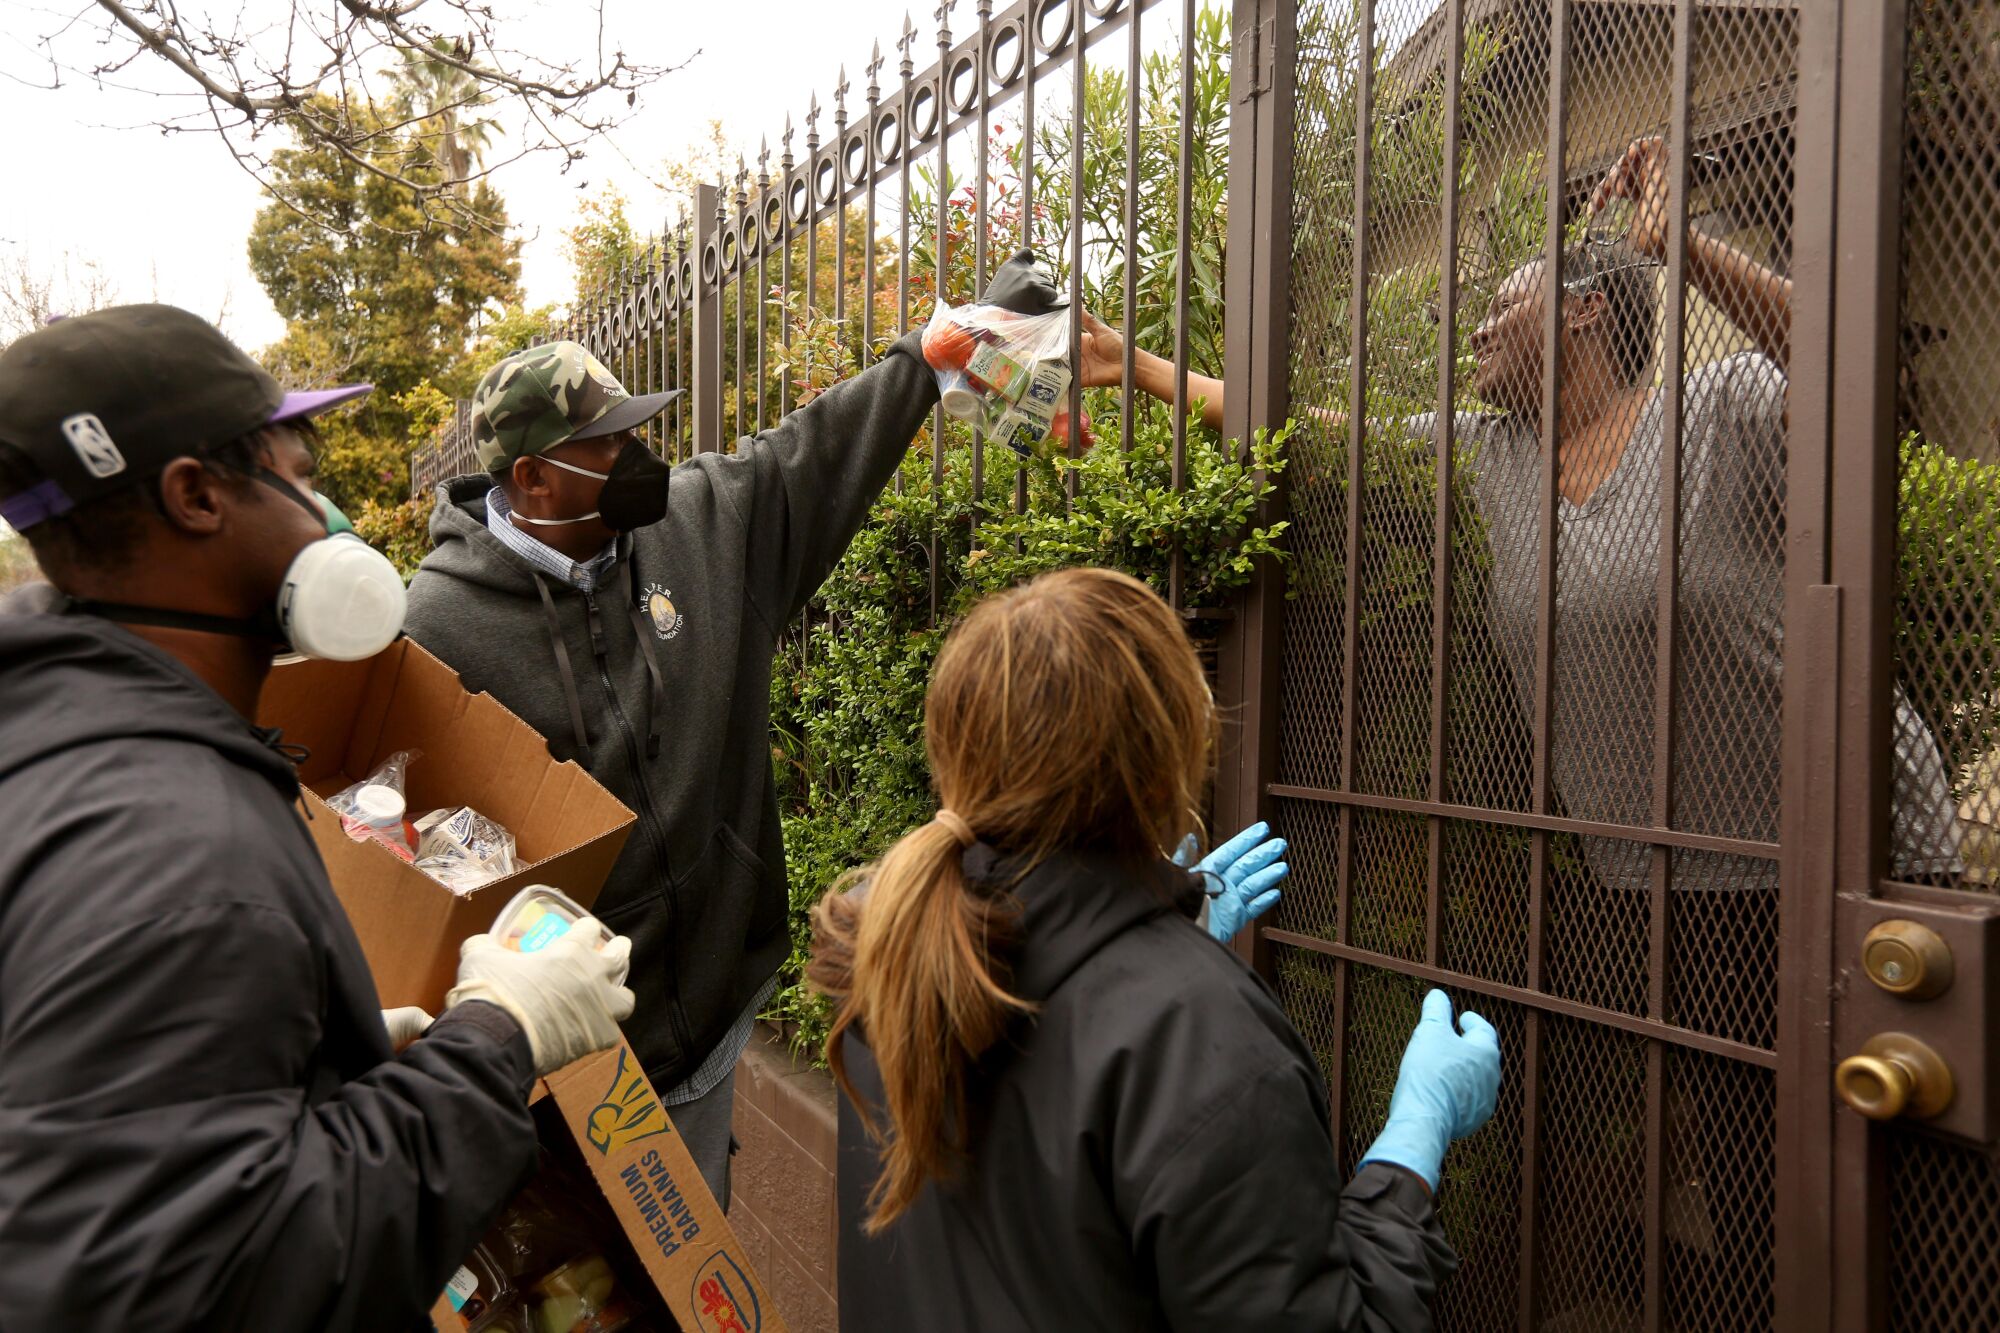 Ansar “Stan” Muhammad, center, executive director of H.E.L.P.E.R. Foundation, delivers food through a fence to the needy in the Oaklwood Neighborhood of Venice on April 9, 2020. Members with H.E.L.P.E.R. Foundation deliver food and groceries to the needy, those who have lost their jobs and seniors who are sheltering in place in the neighborhood due to the COVID-19 pandemic.